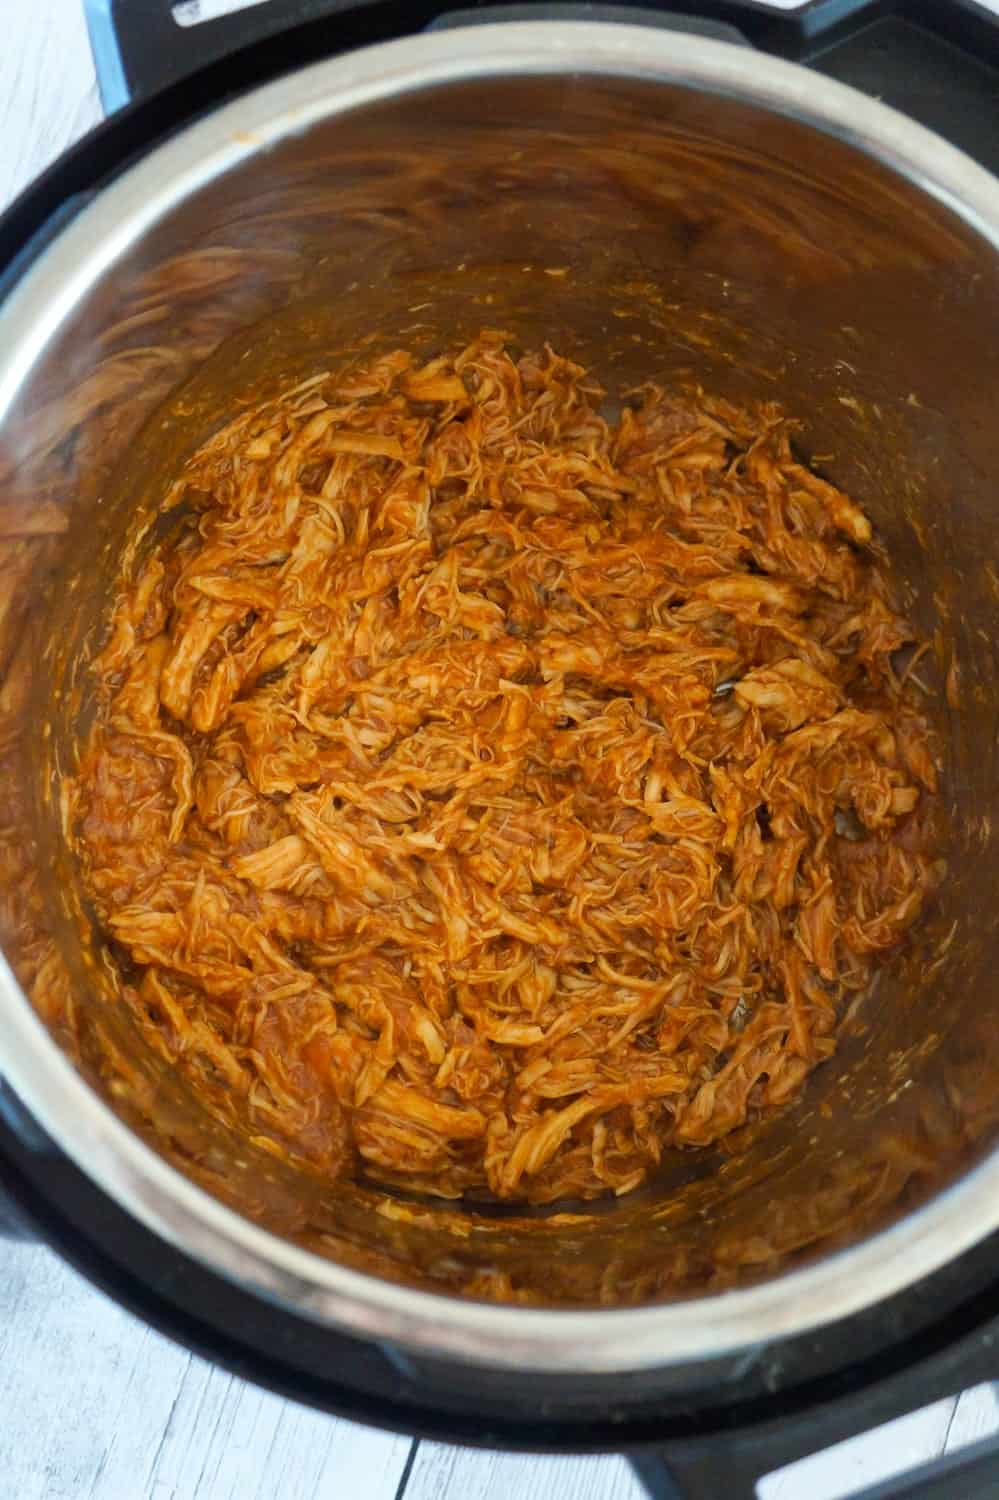 Instant Pot Honey BBQ Chicken Sandwiches are an easy and delicious dinner perfect for weeknights. These shredded chicken sandwiches with honey BBQ sauce are topped with coleslaw and French's fried onions.